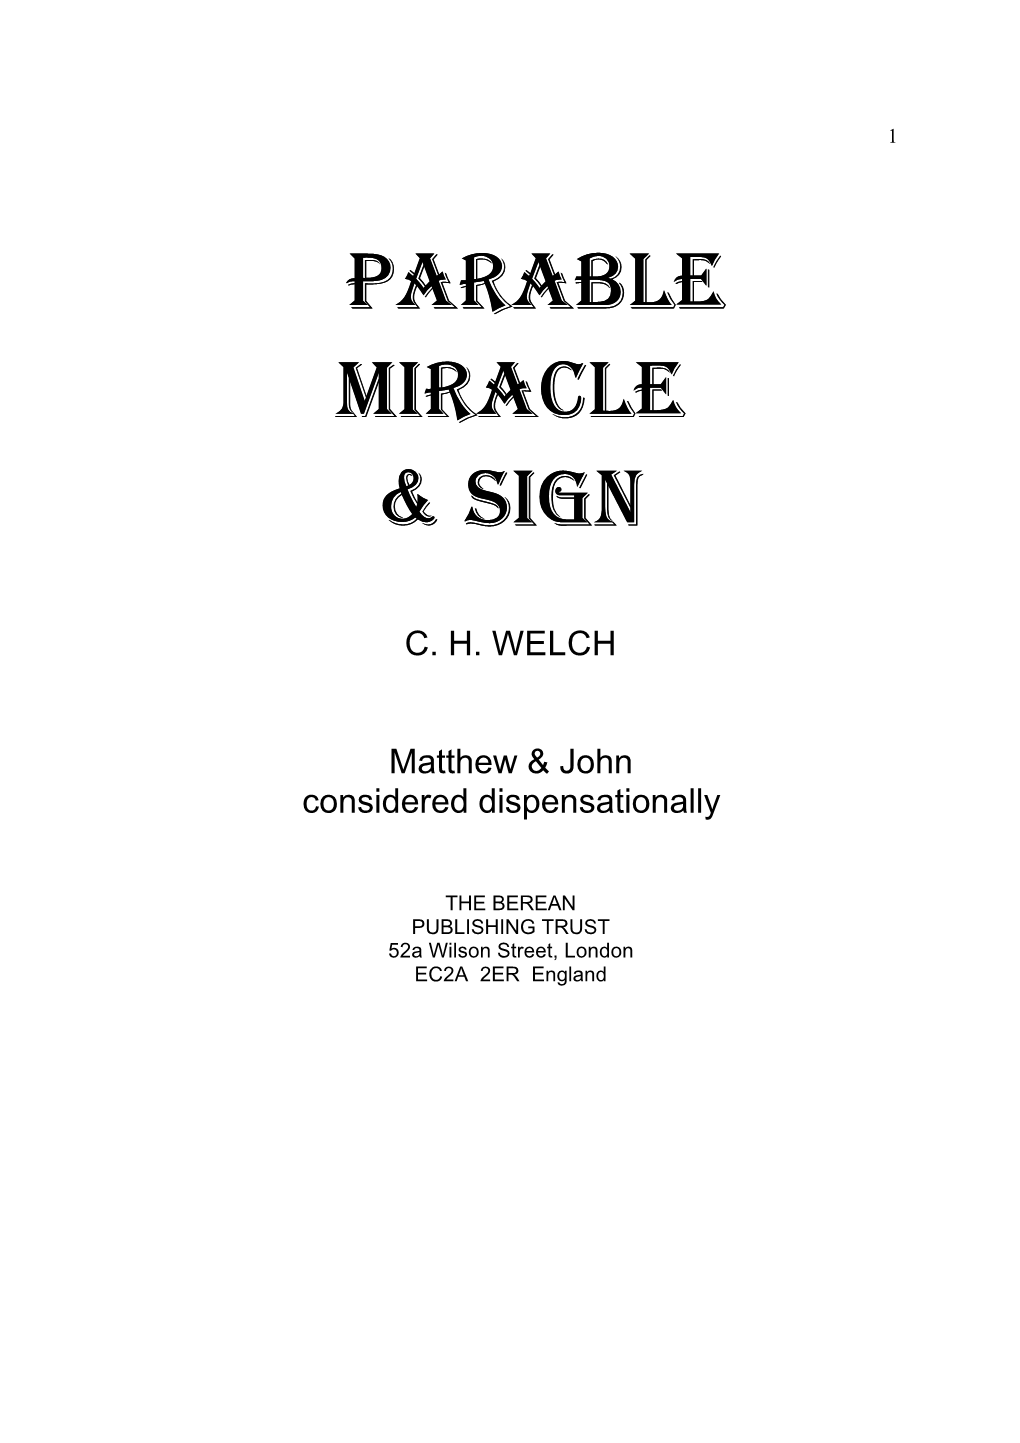 Parable Miracle & Sign